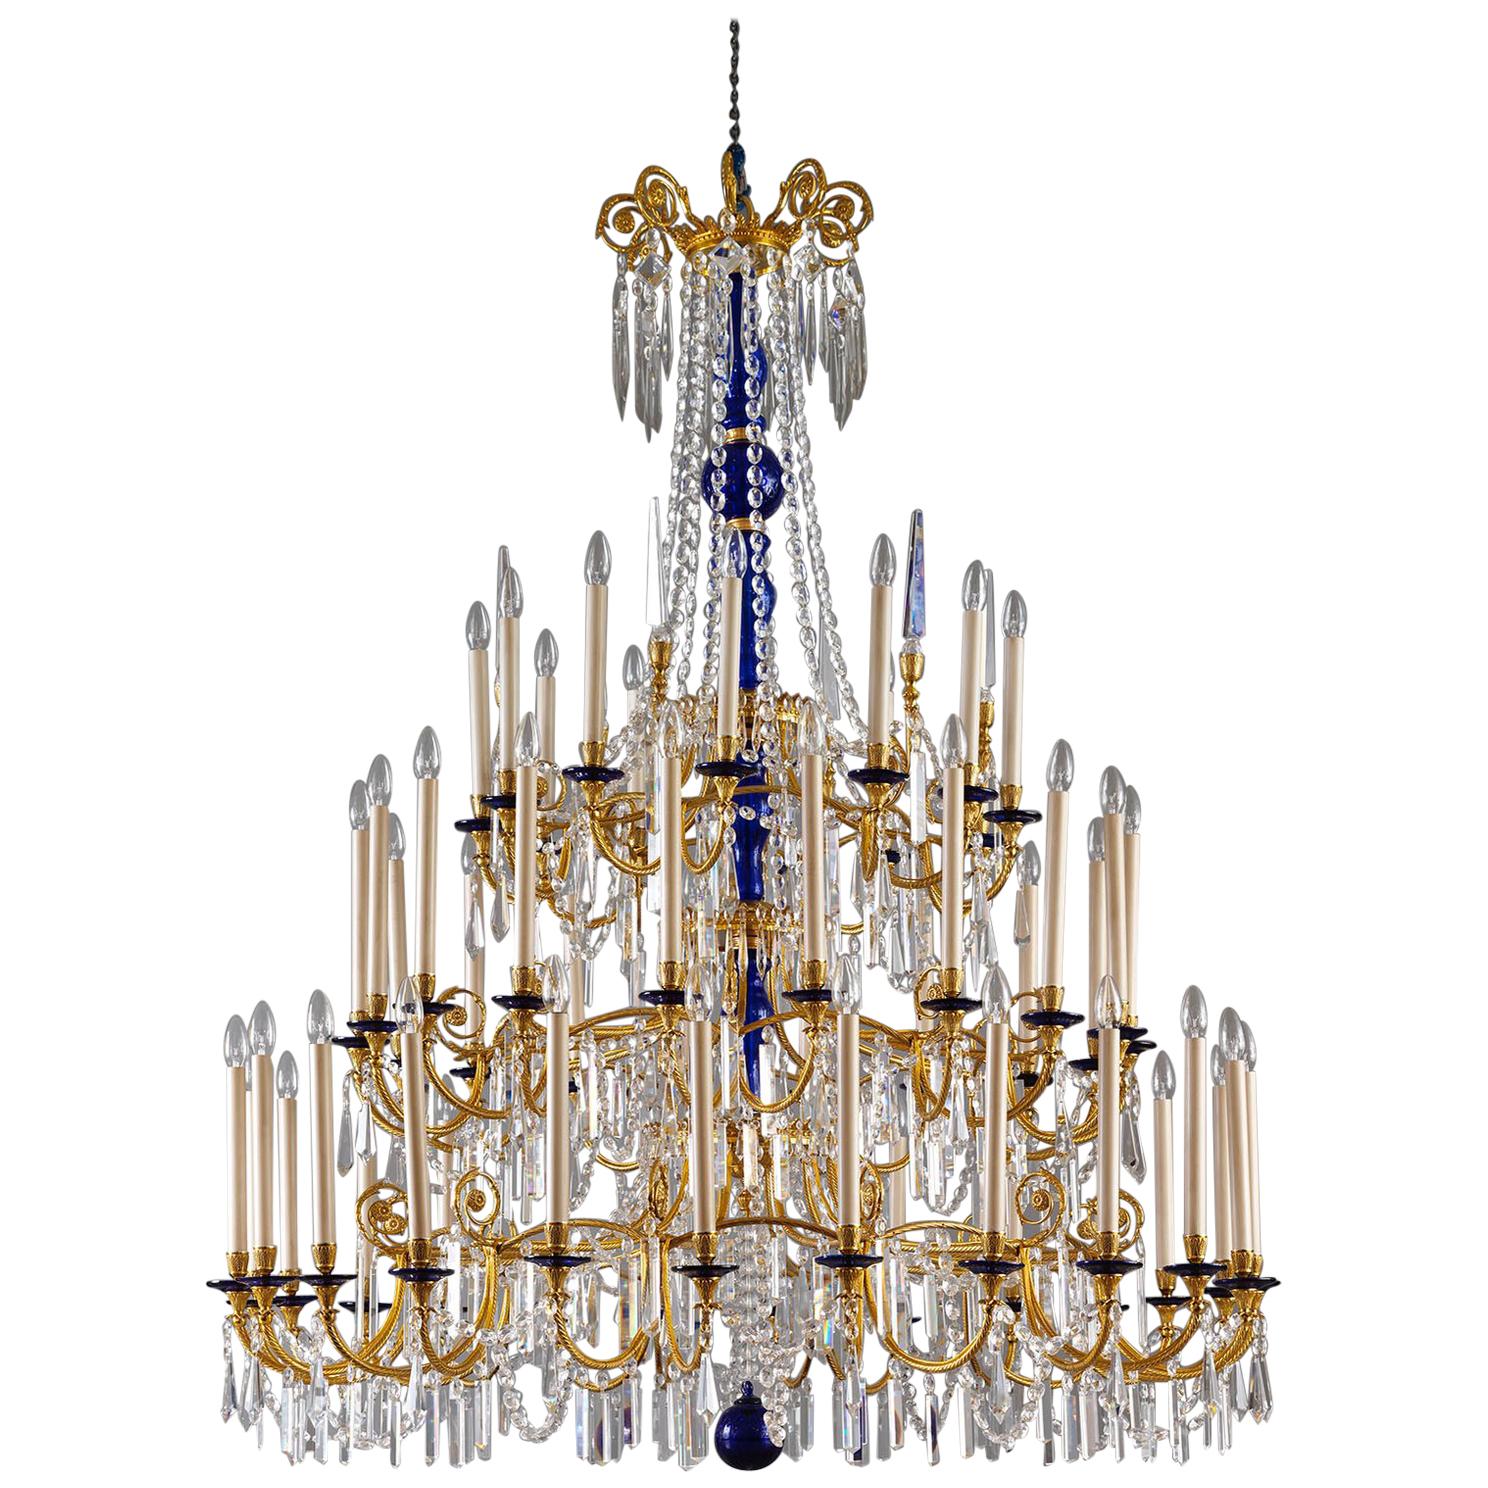 Baltic Style Gilt Bronze, Glass and Crystal Chandelier by Gherardo Degli Albizzi For Sale